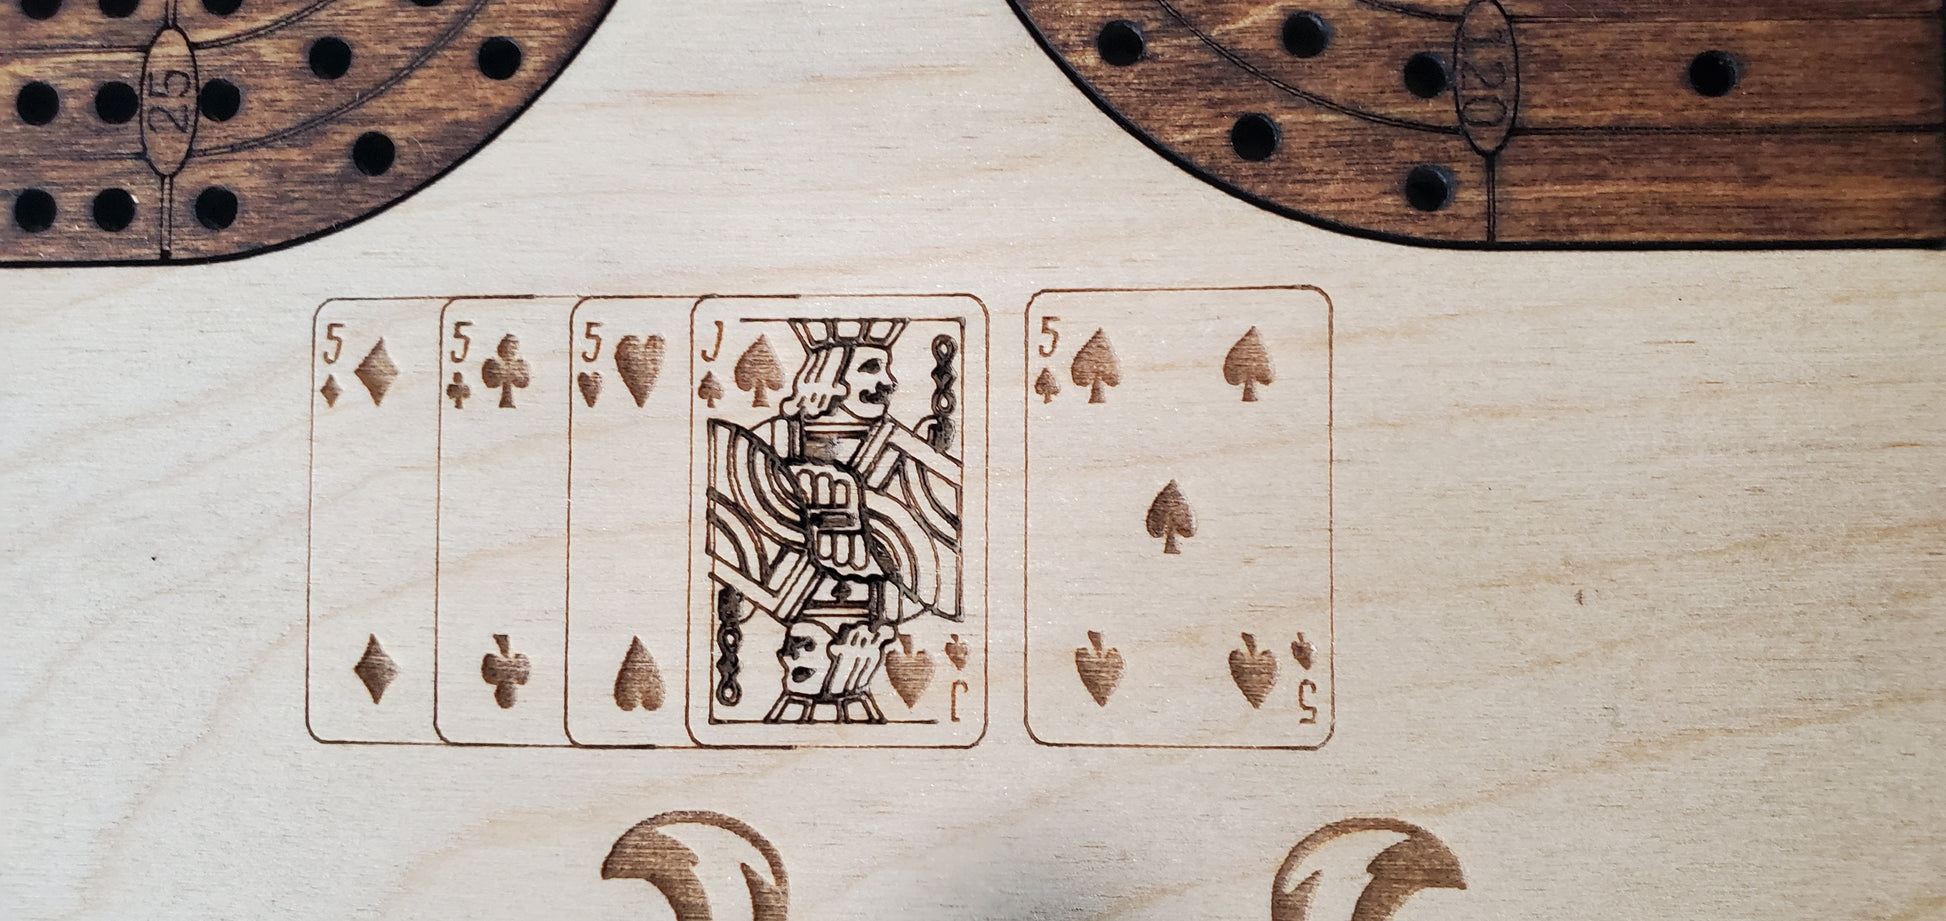 29 Hand Cribbage Board with Skunks